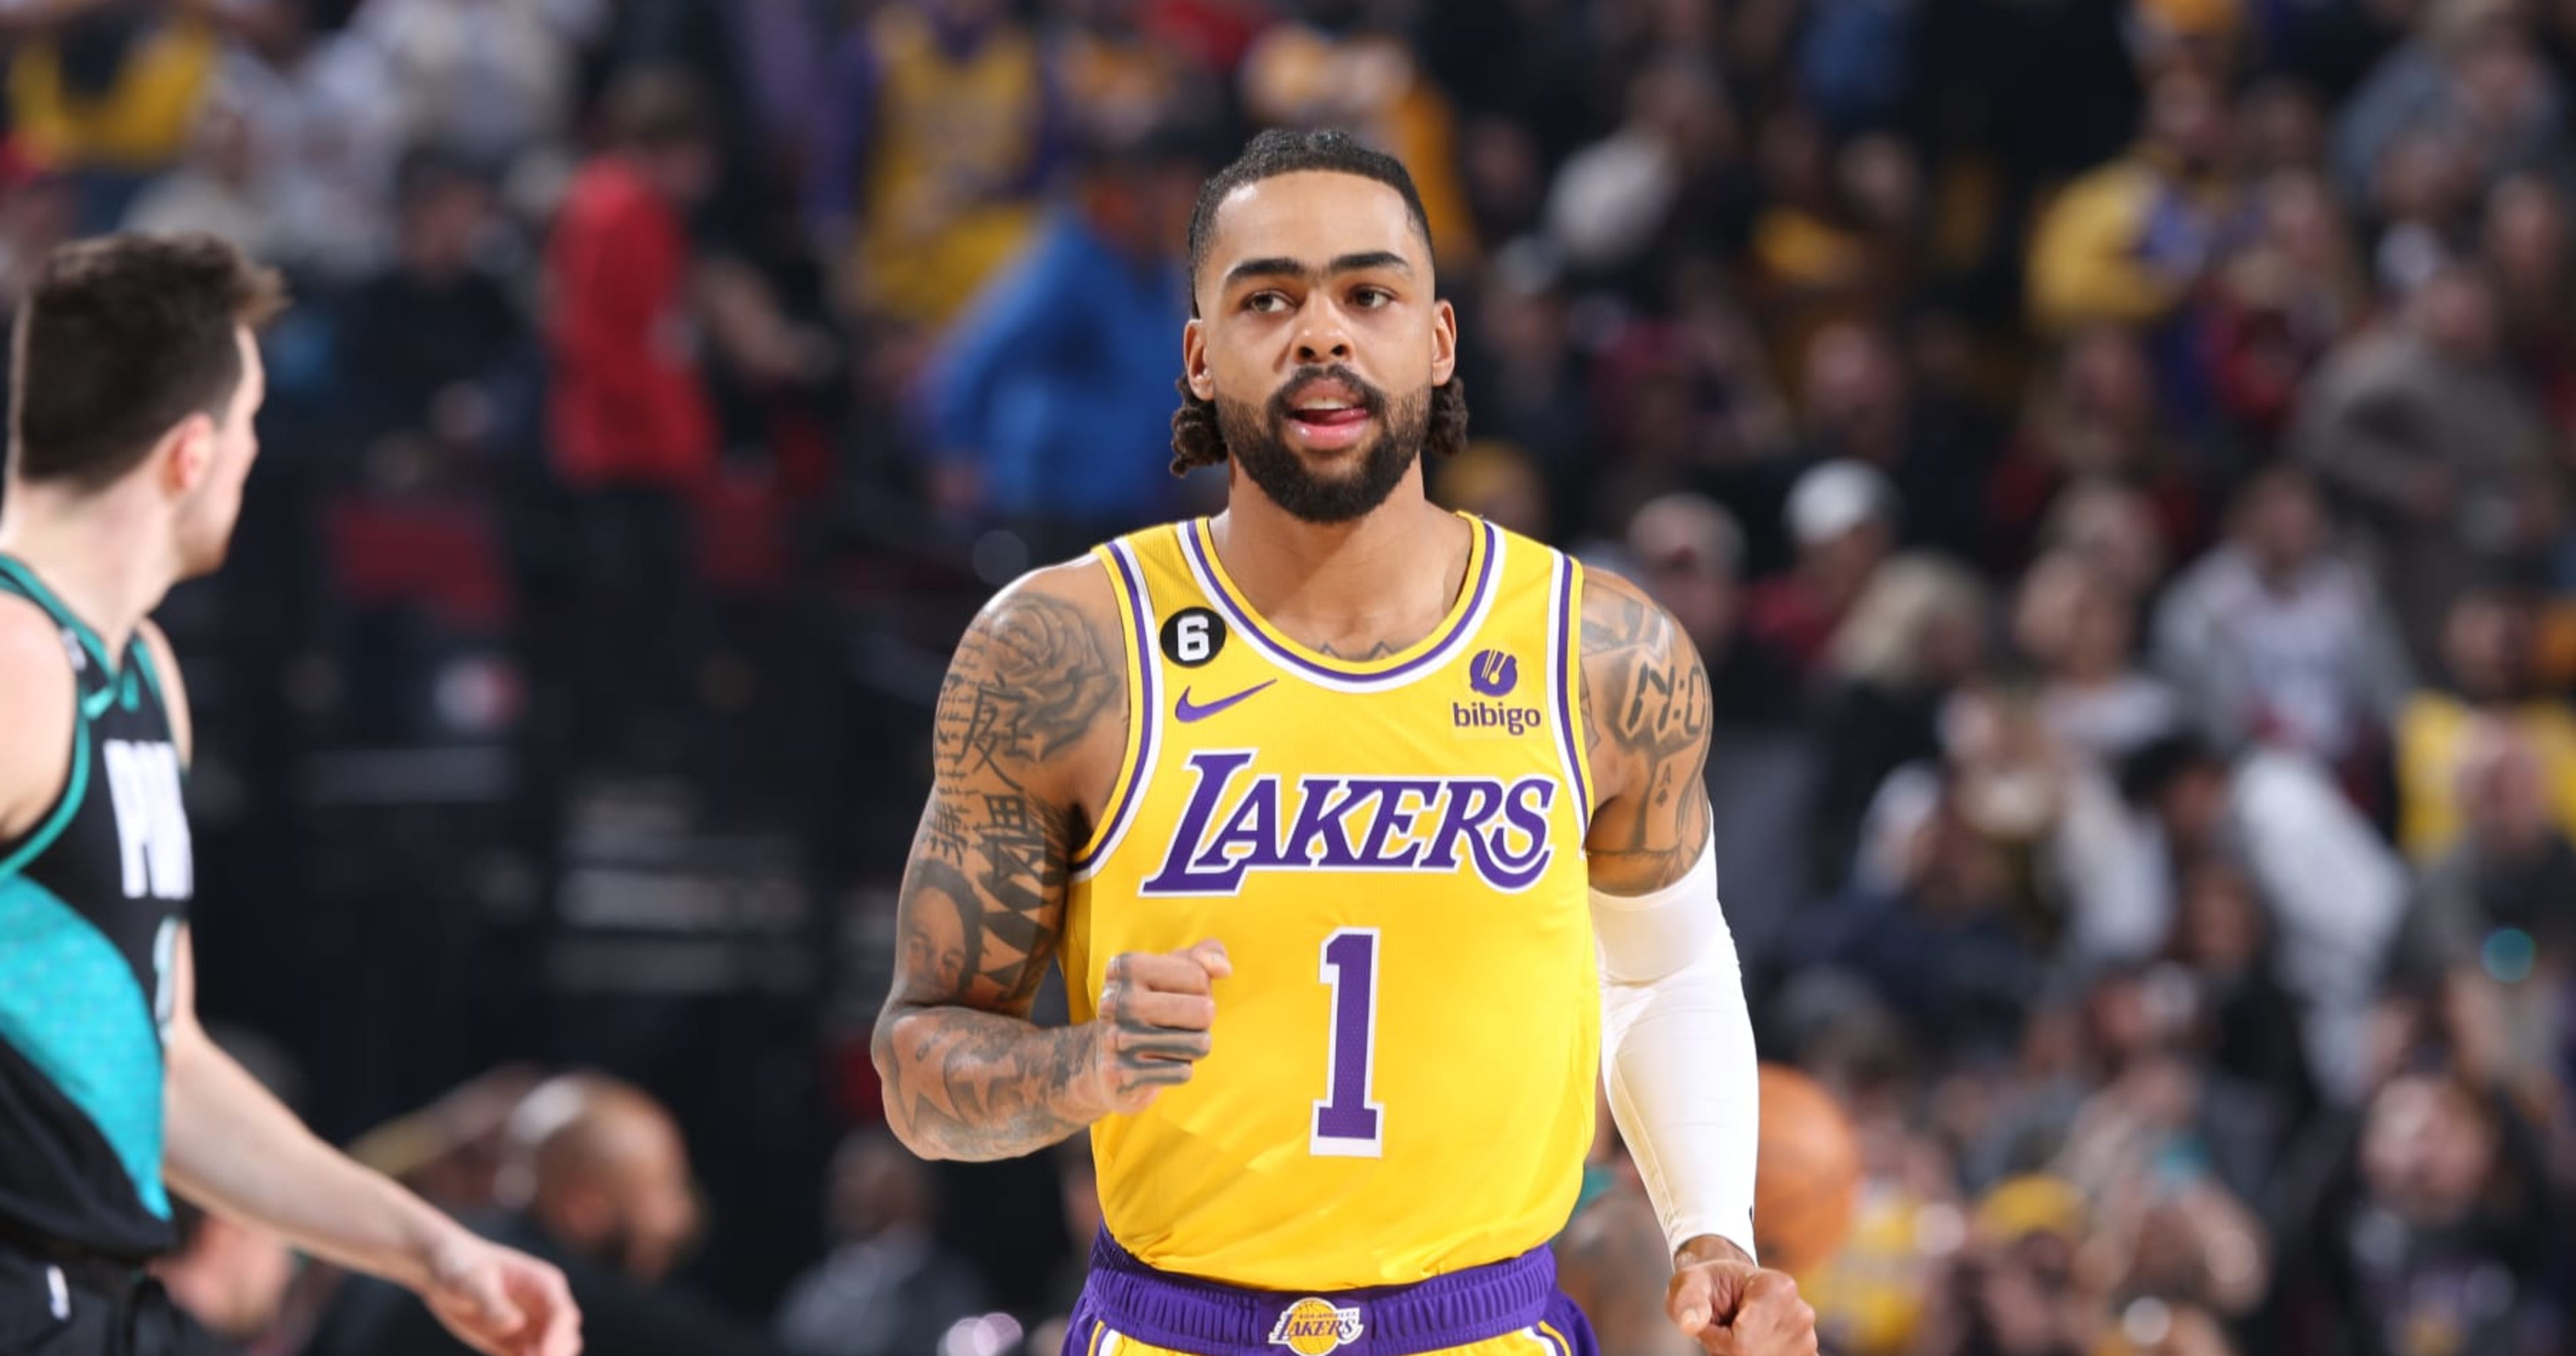 Lakers Rumors: D'Angelo Russell Eyed as Future PG After Trade, LA